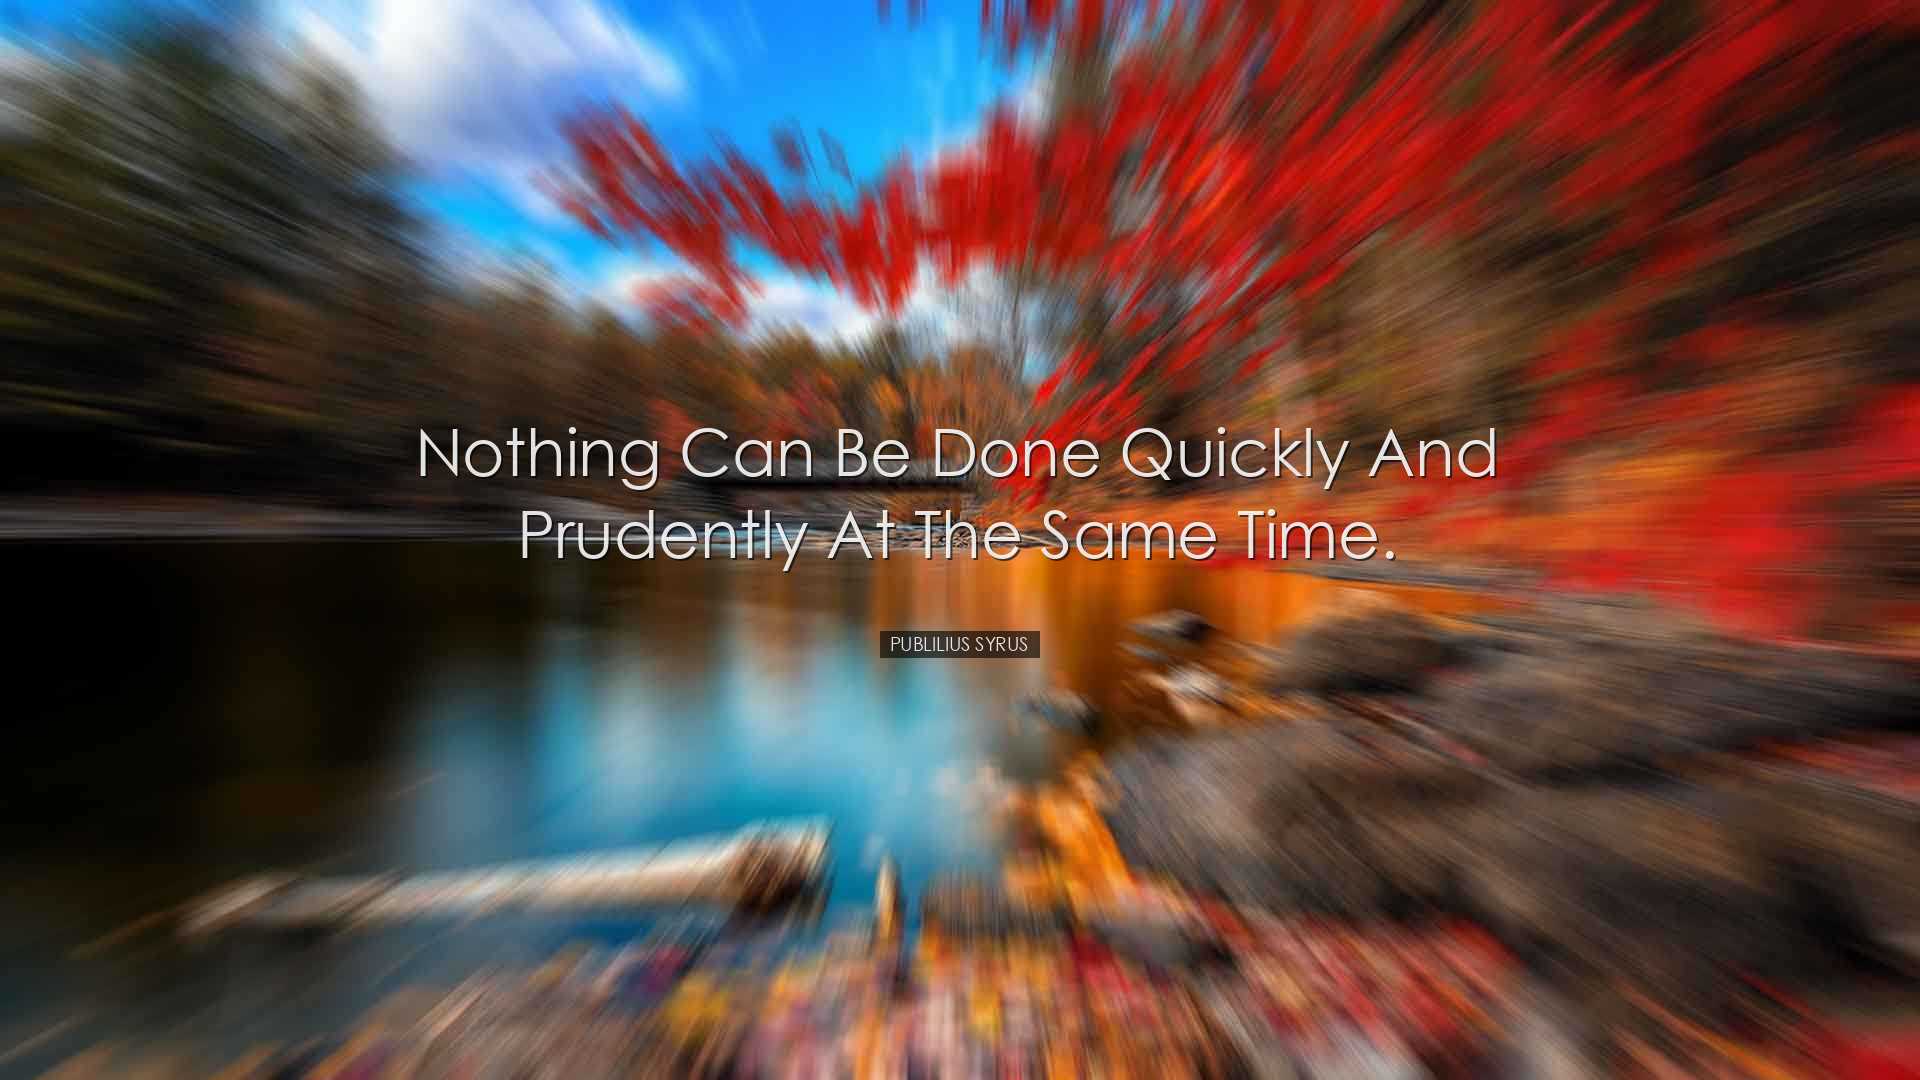 Nothing can be done quickly and prudently at the same time. - Publ